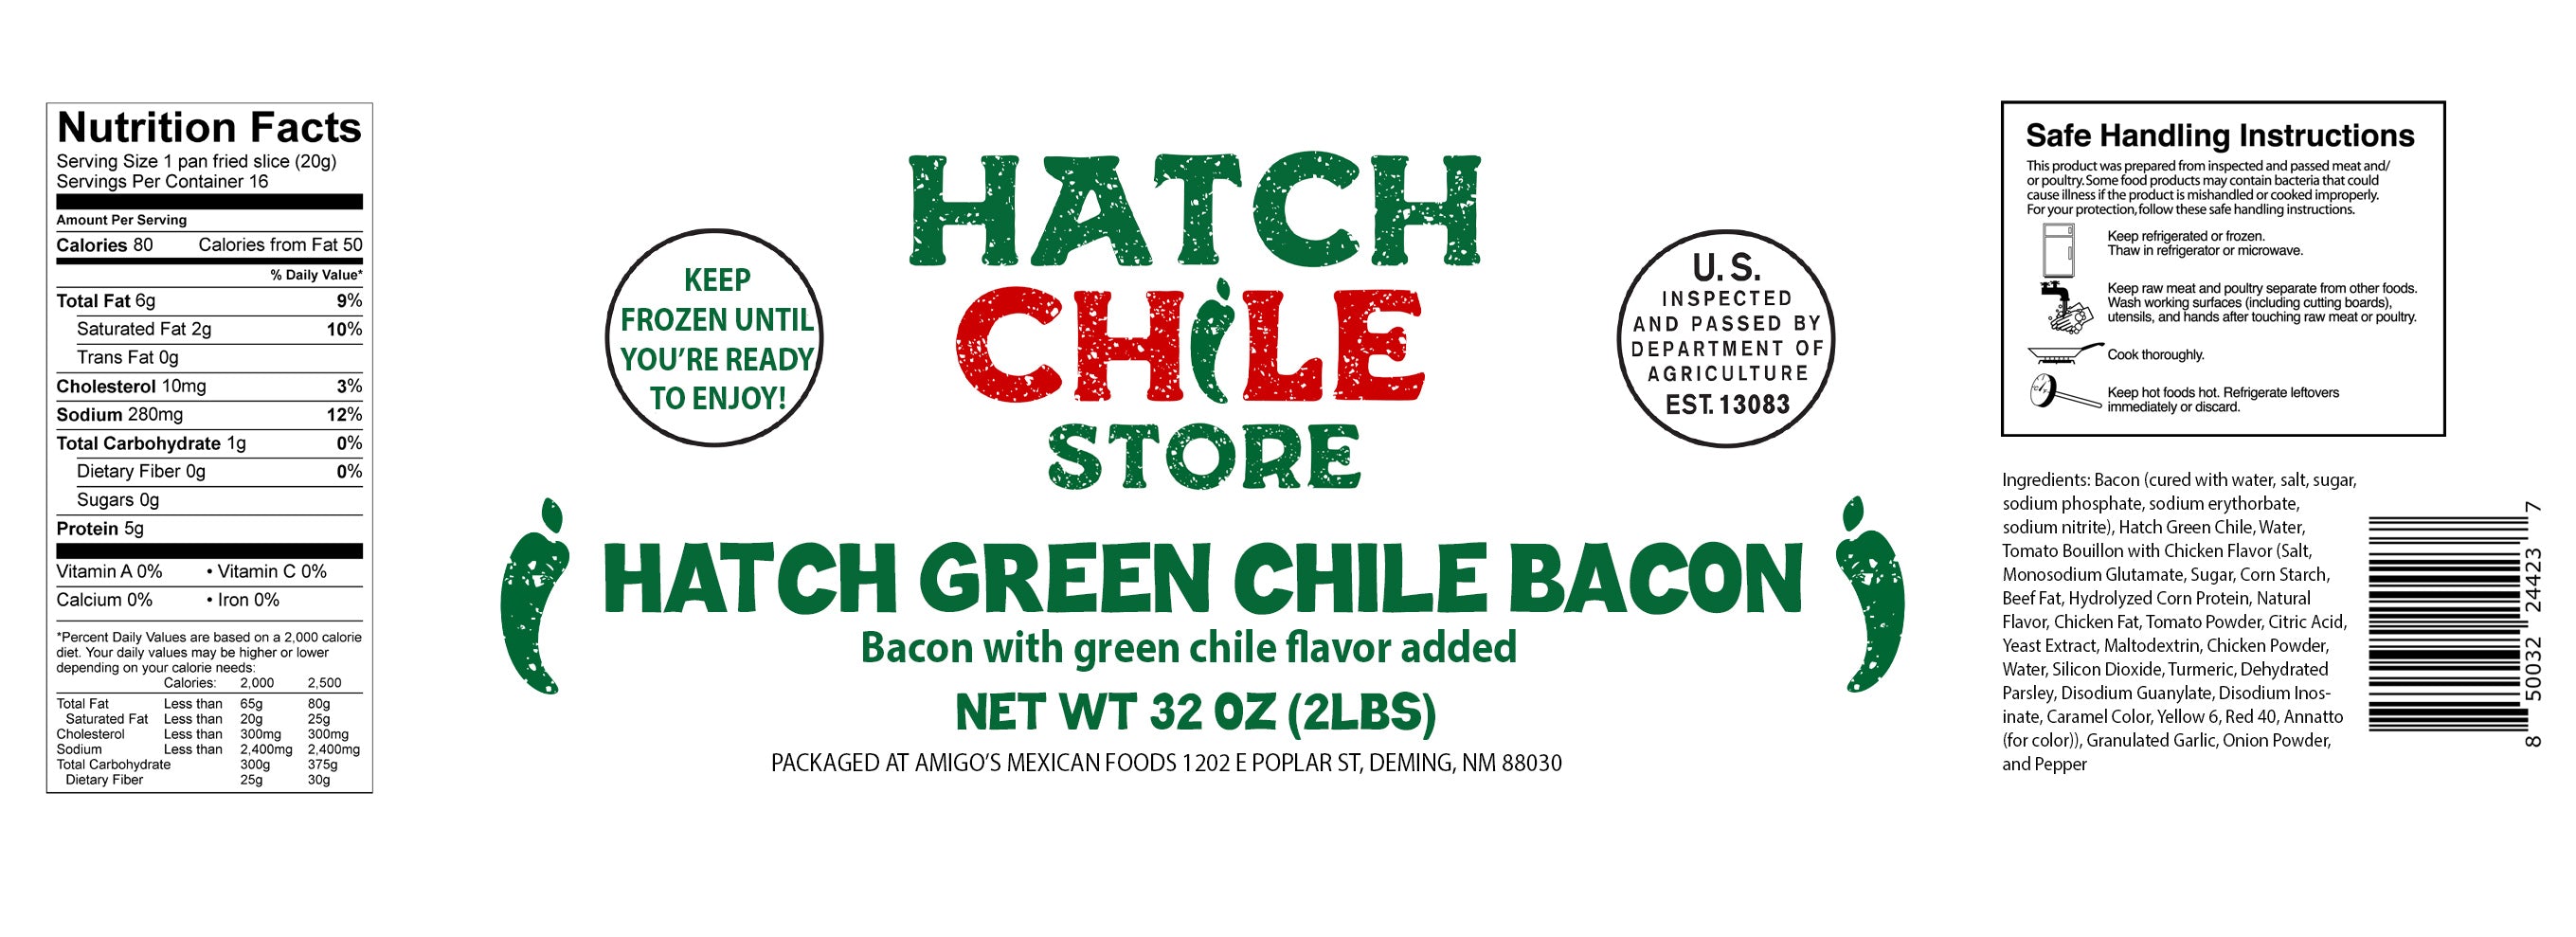 Image of a food product label for "Hatch Green Chile Bacon" showing nutrition facts, cooking instructions, a logo, USDA inspection seal, and a barcode. The label includes text emphasizing the product